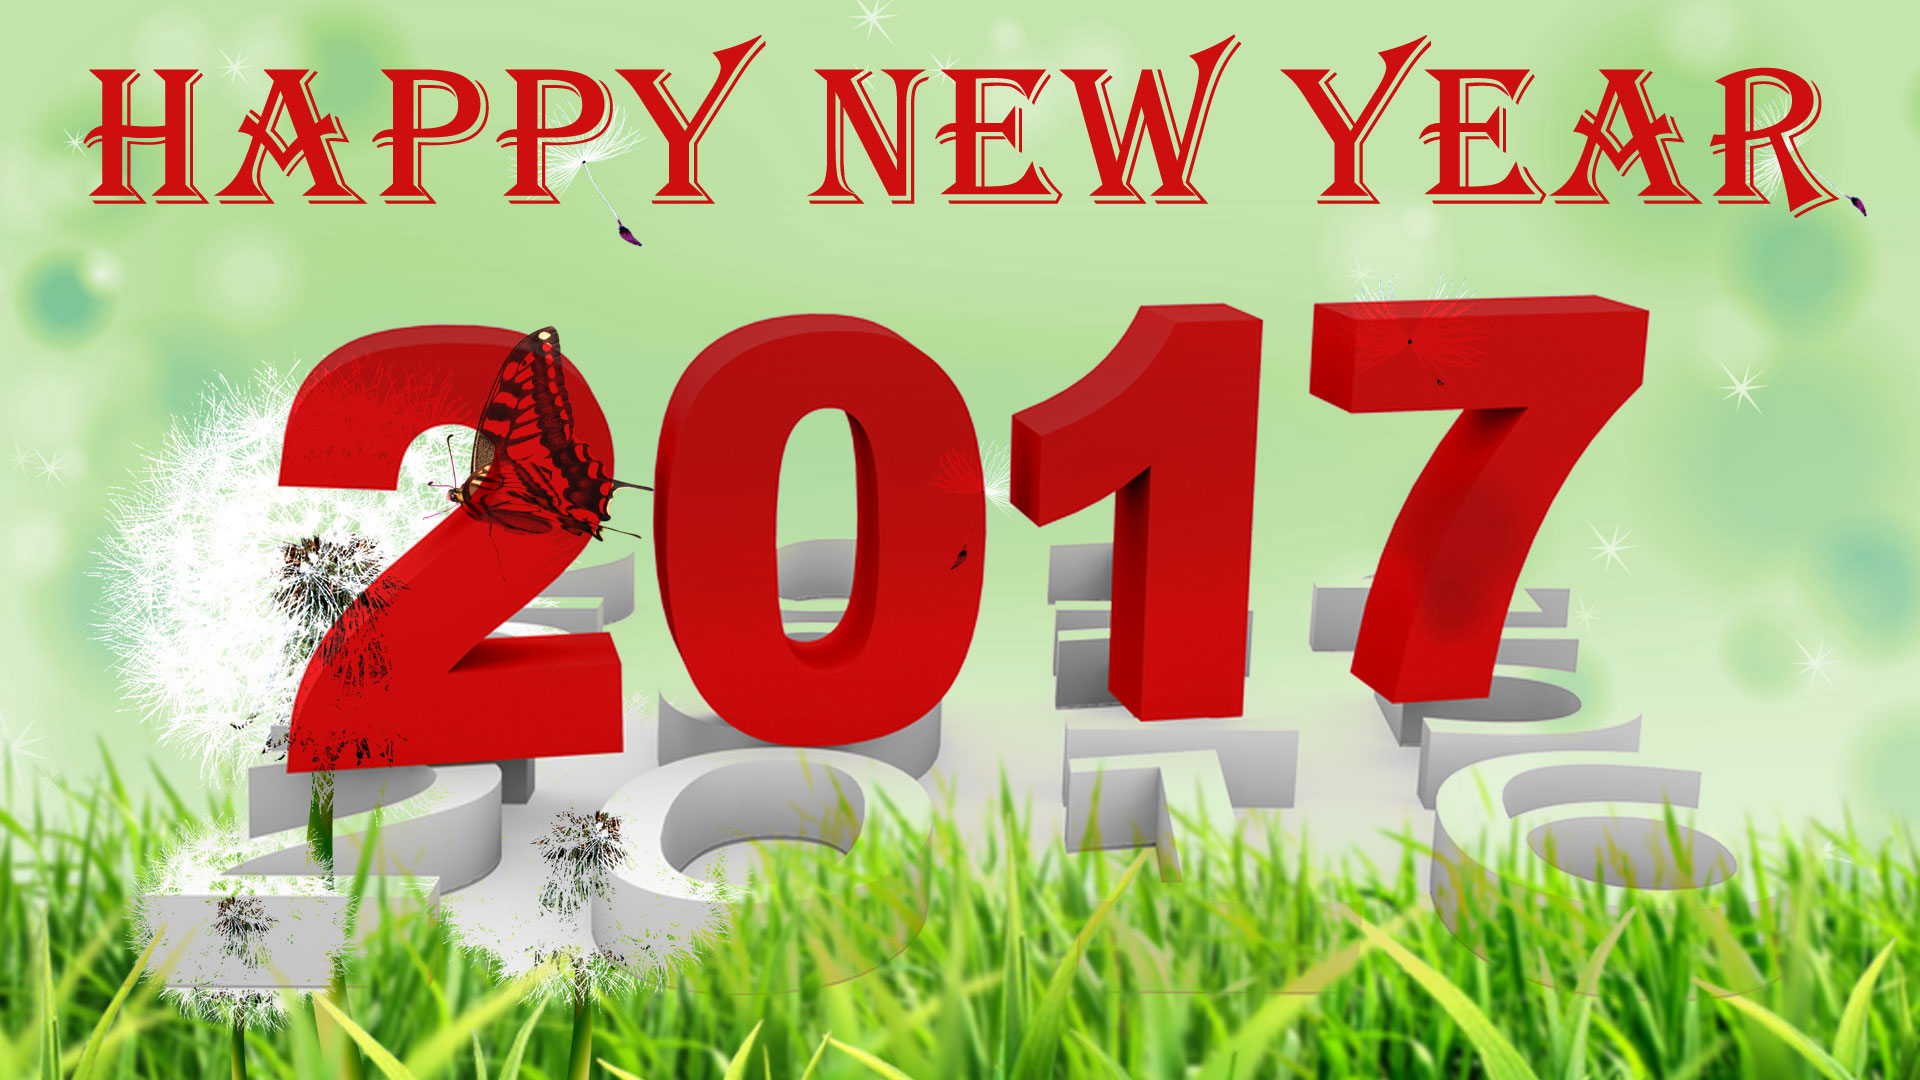 Happy New Year Images 2017